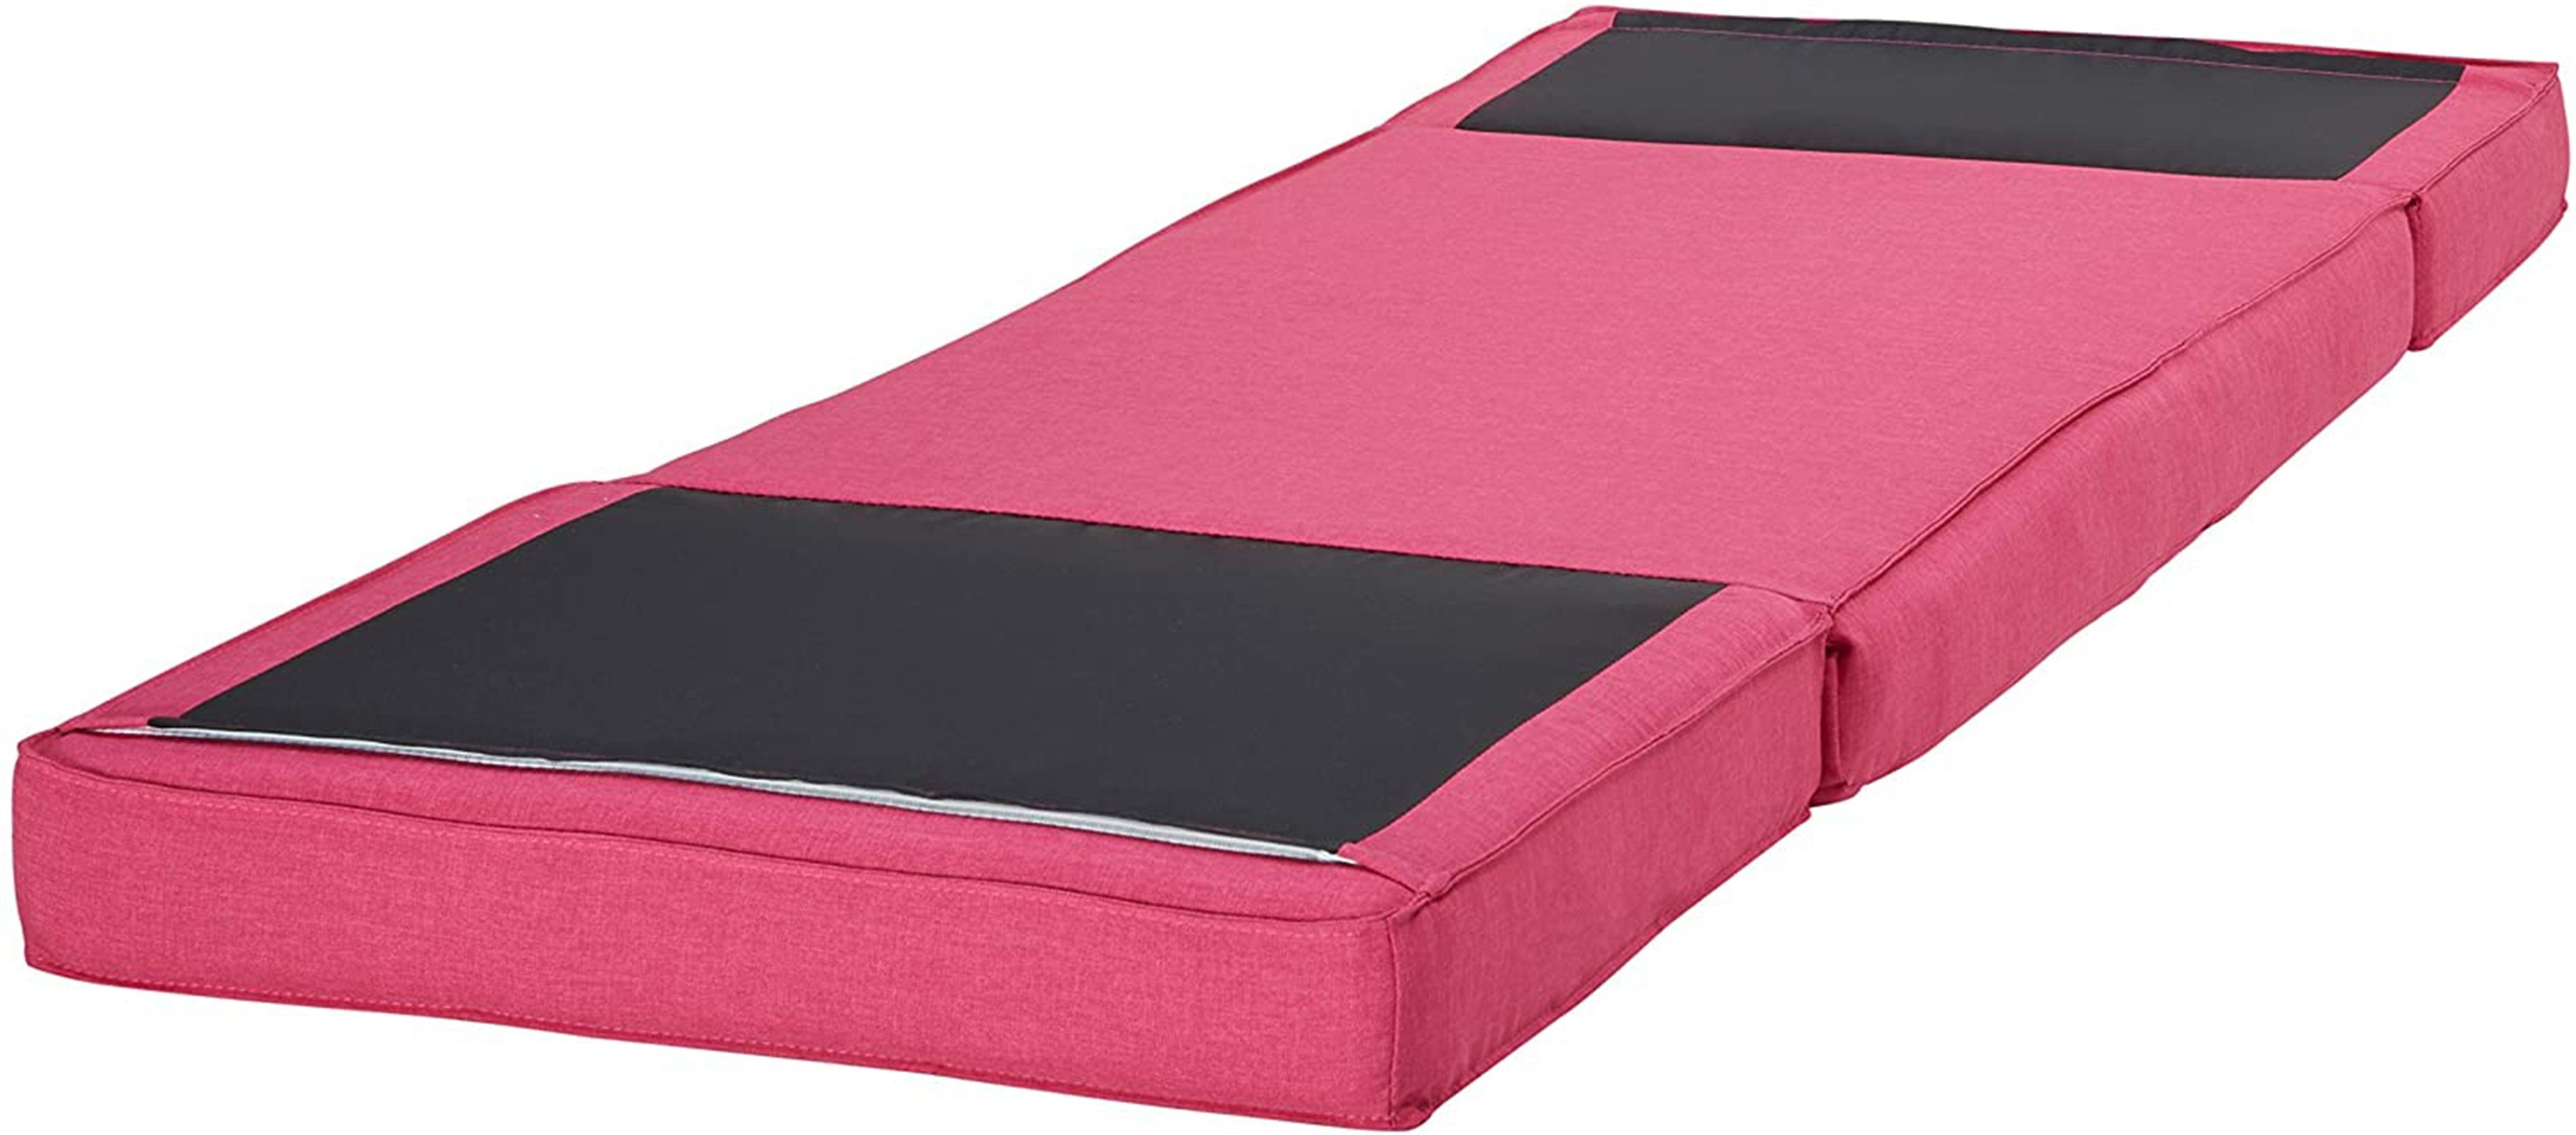 sesselseller 24 Schlafsessel Relaxsessel Stoff klein pink